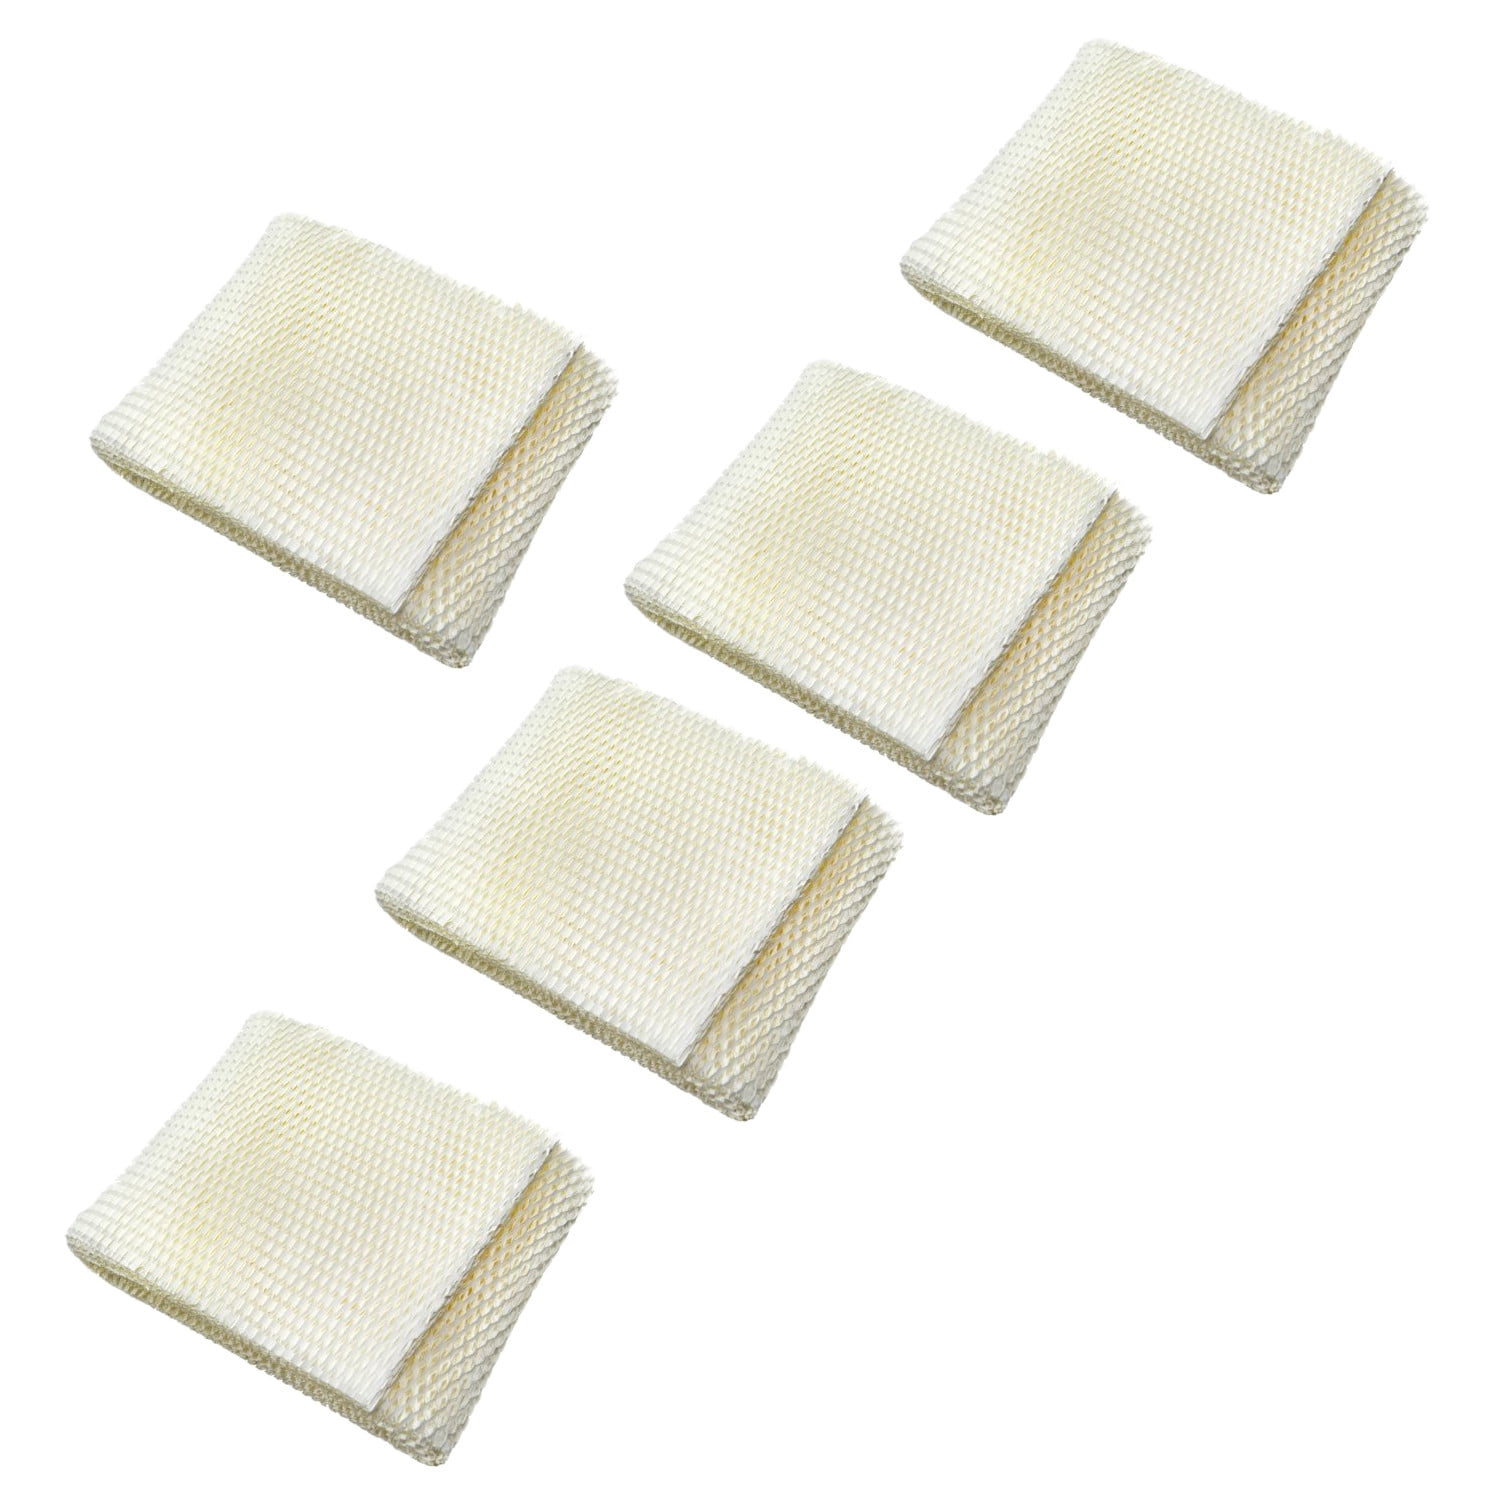 2-Pack HQRP Wick Filter for MoistAir MAF1 MA0950 MA1200 MA1201 09500 12000 12001